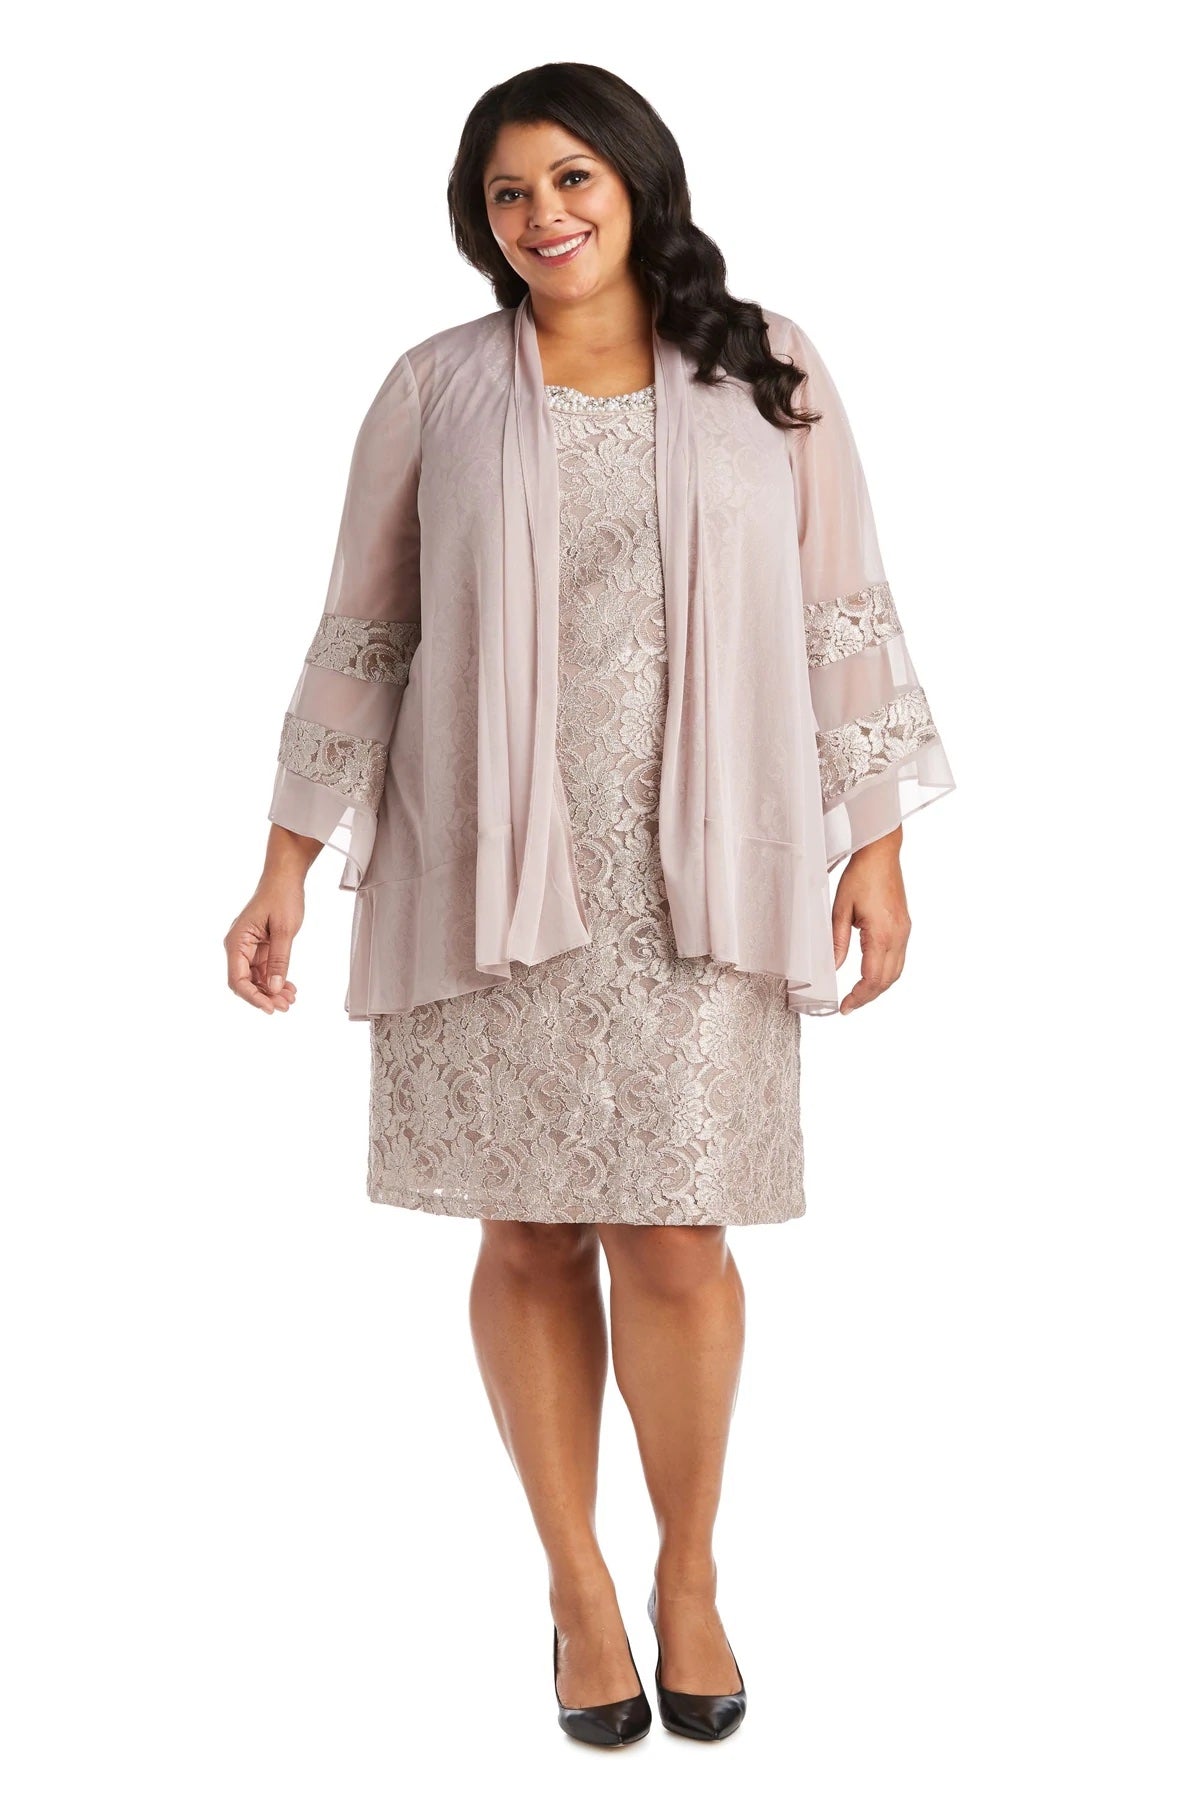 R&M Richards 2 Piece Bell Sleeve Plus Size Mother Of The Bride Dress –  SleekTrends